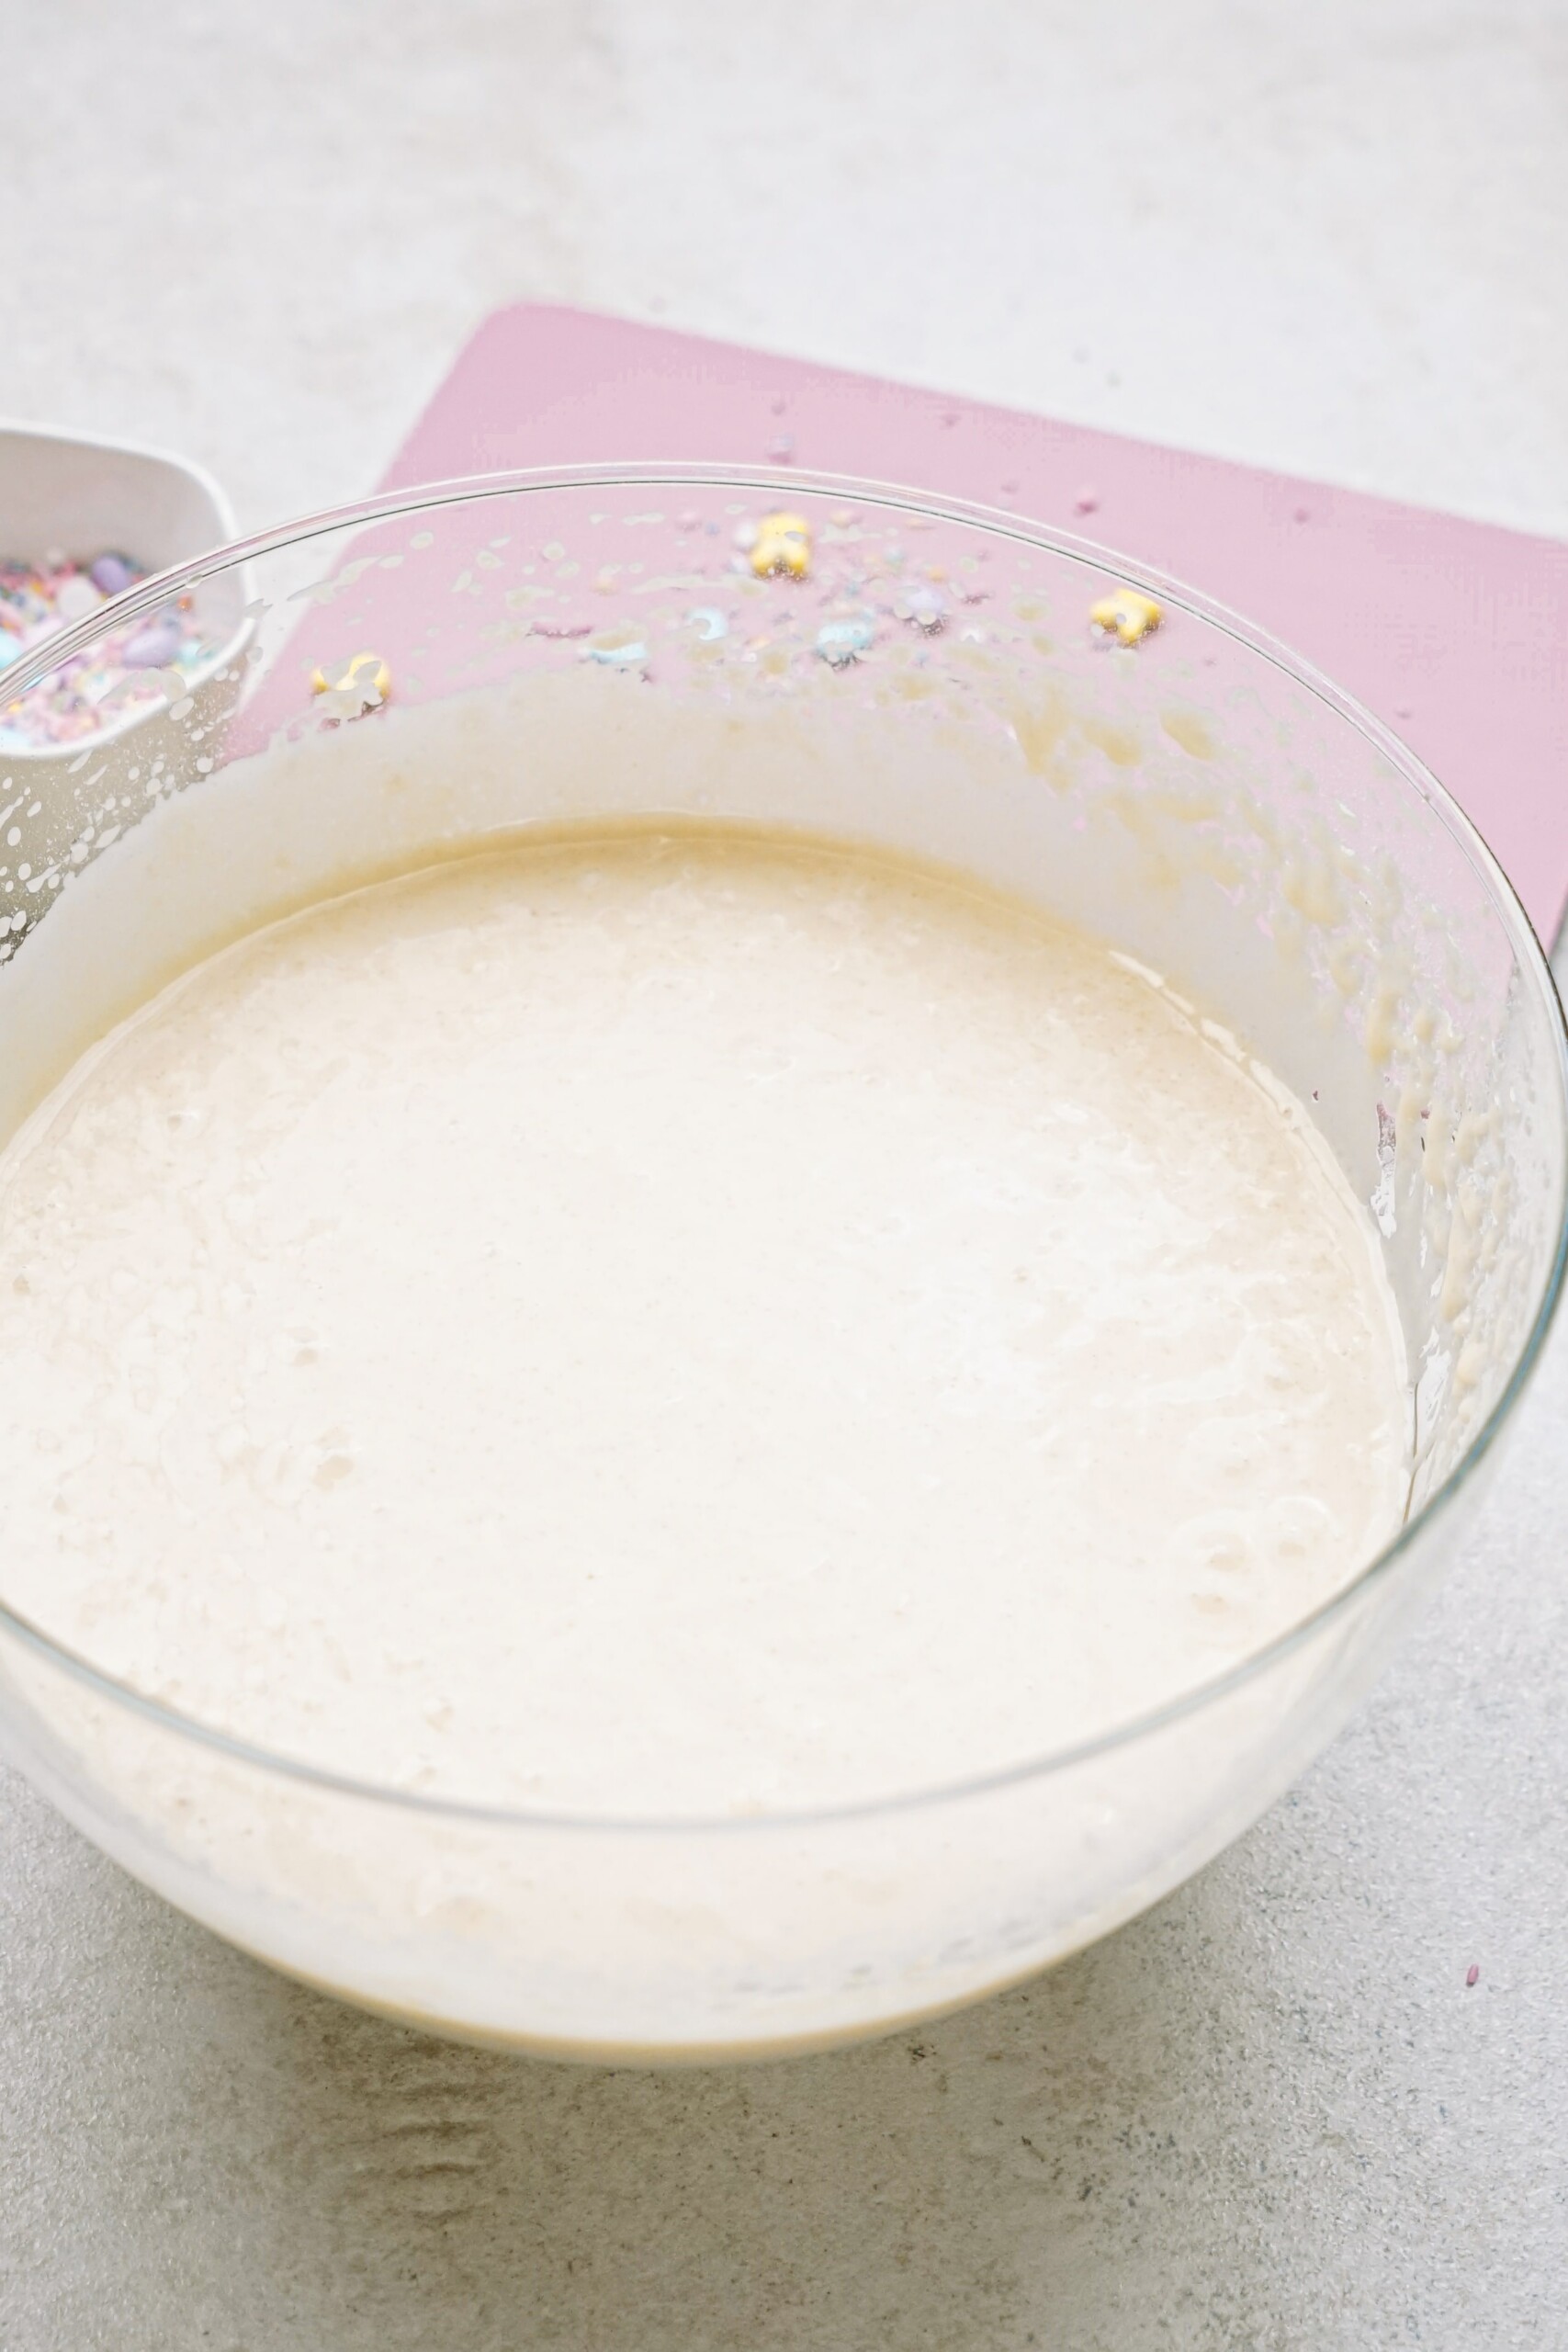 A bowl of cake batter on a pink mat, with visible air bubbles and a whisk partially in view.